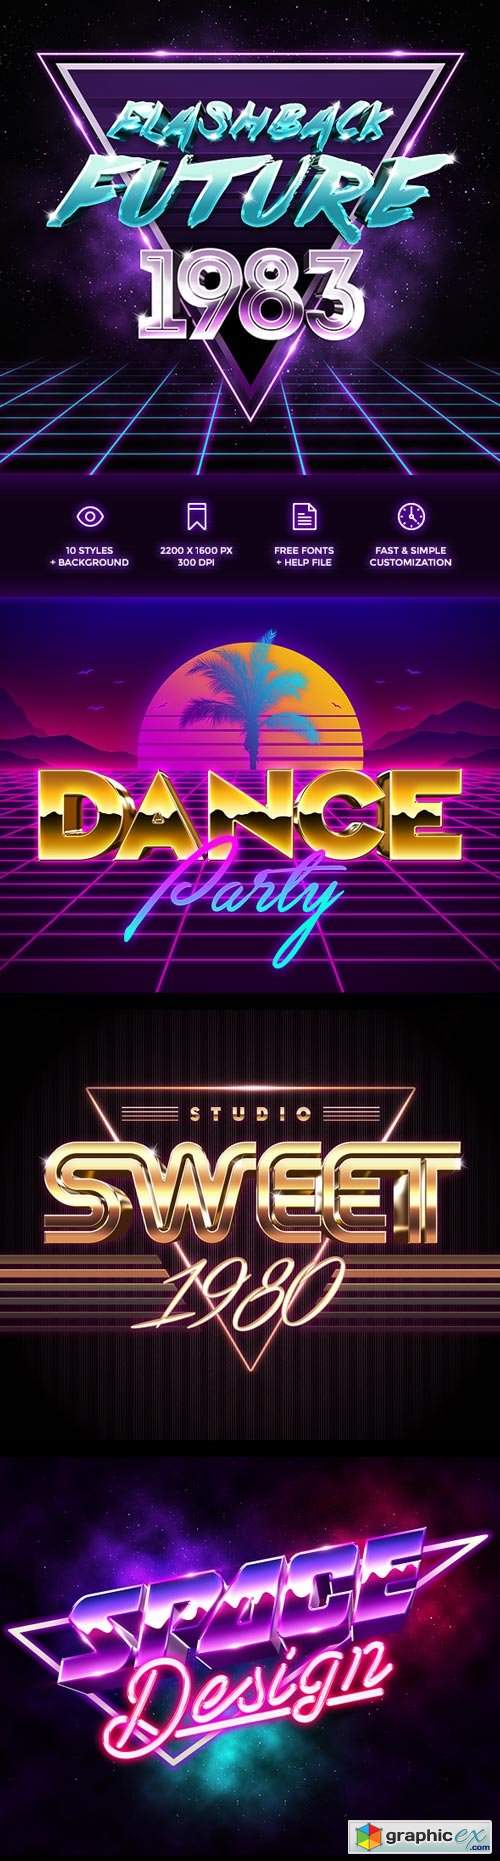 80s Style Text Effects Free Download Vector Stock Image Photoshop Icon